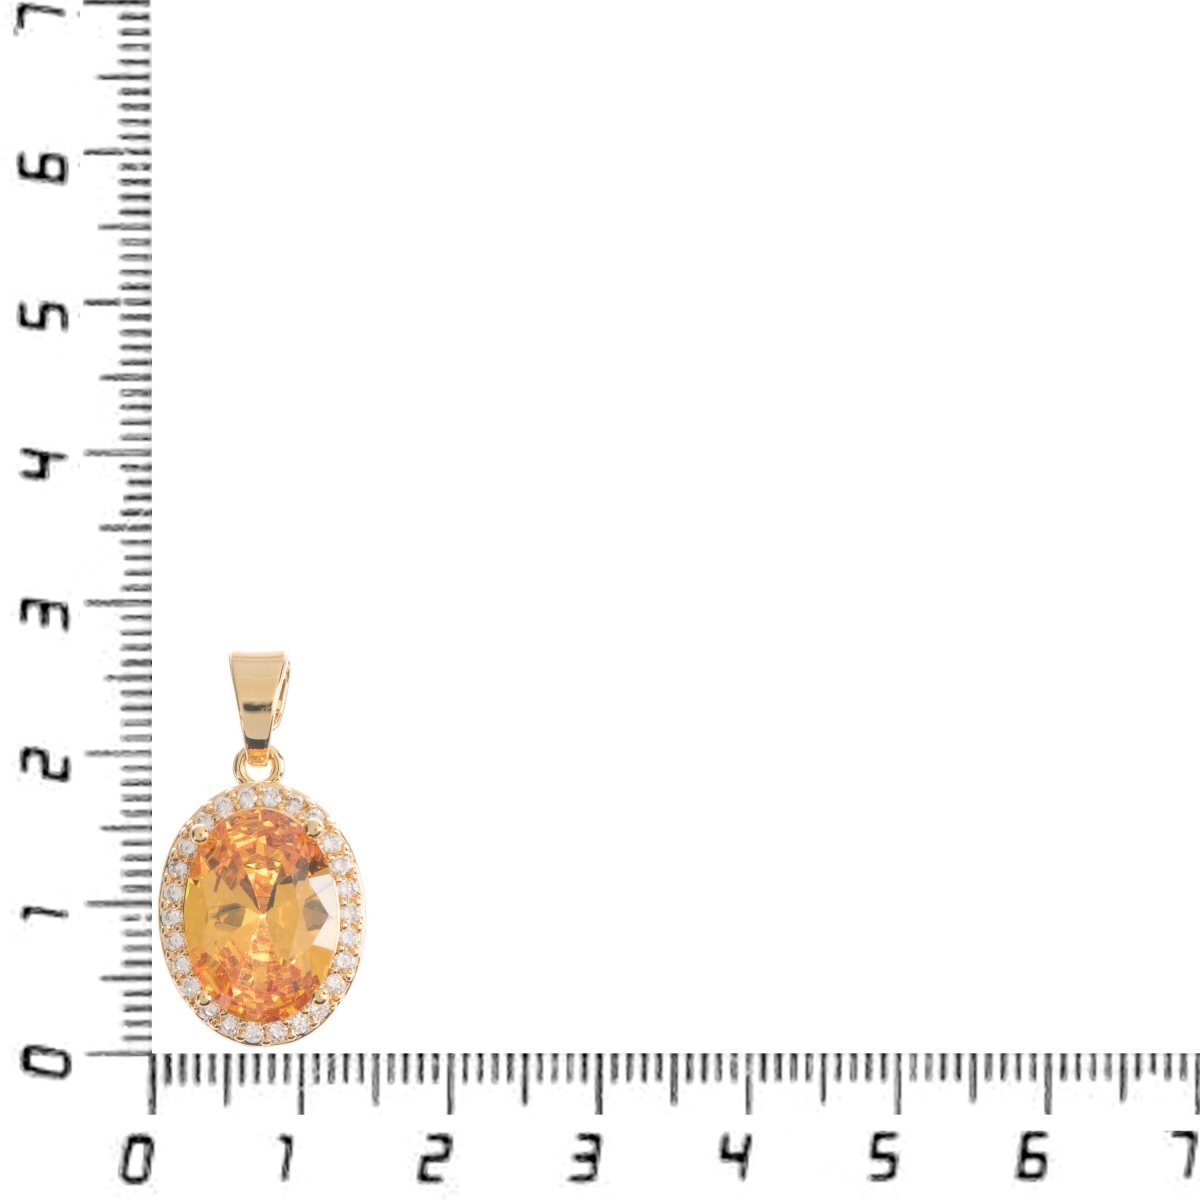 24K Gold Filled Fiery Orange, Sunburst, Pink Red Green Oval Charm Cubic Zirconia Bails for Earring Necklace Pendant Jewelry Making Supplies H-764 - H-770 - DLUXCA